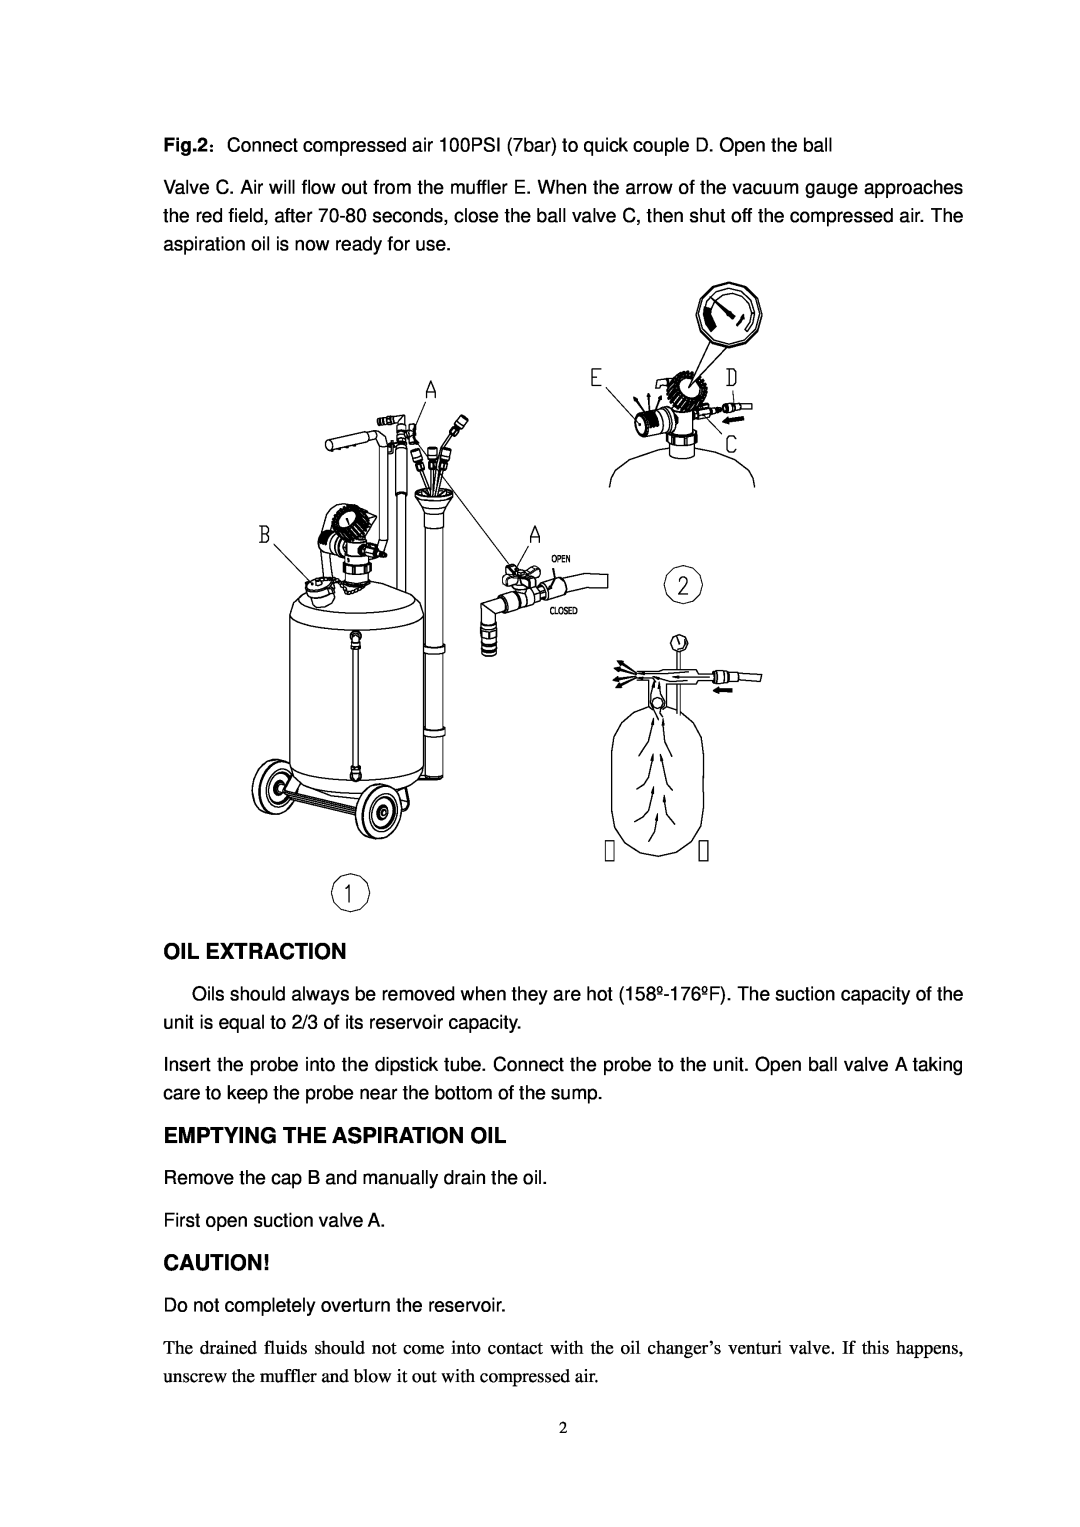 Northern Industrial Tools 109088 user manual Oil Extraction, Emptying The Aspiration Oil 